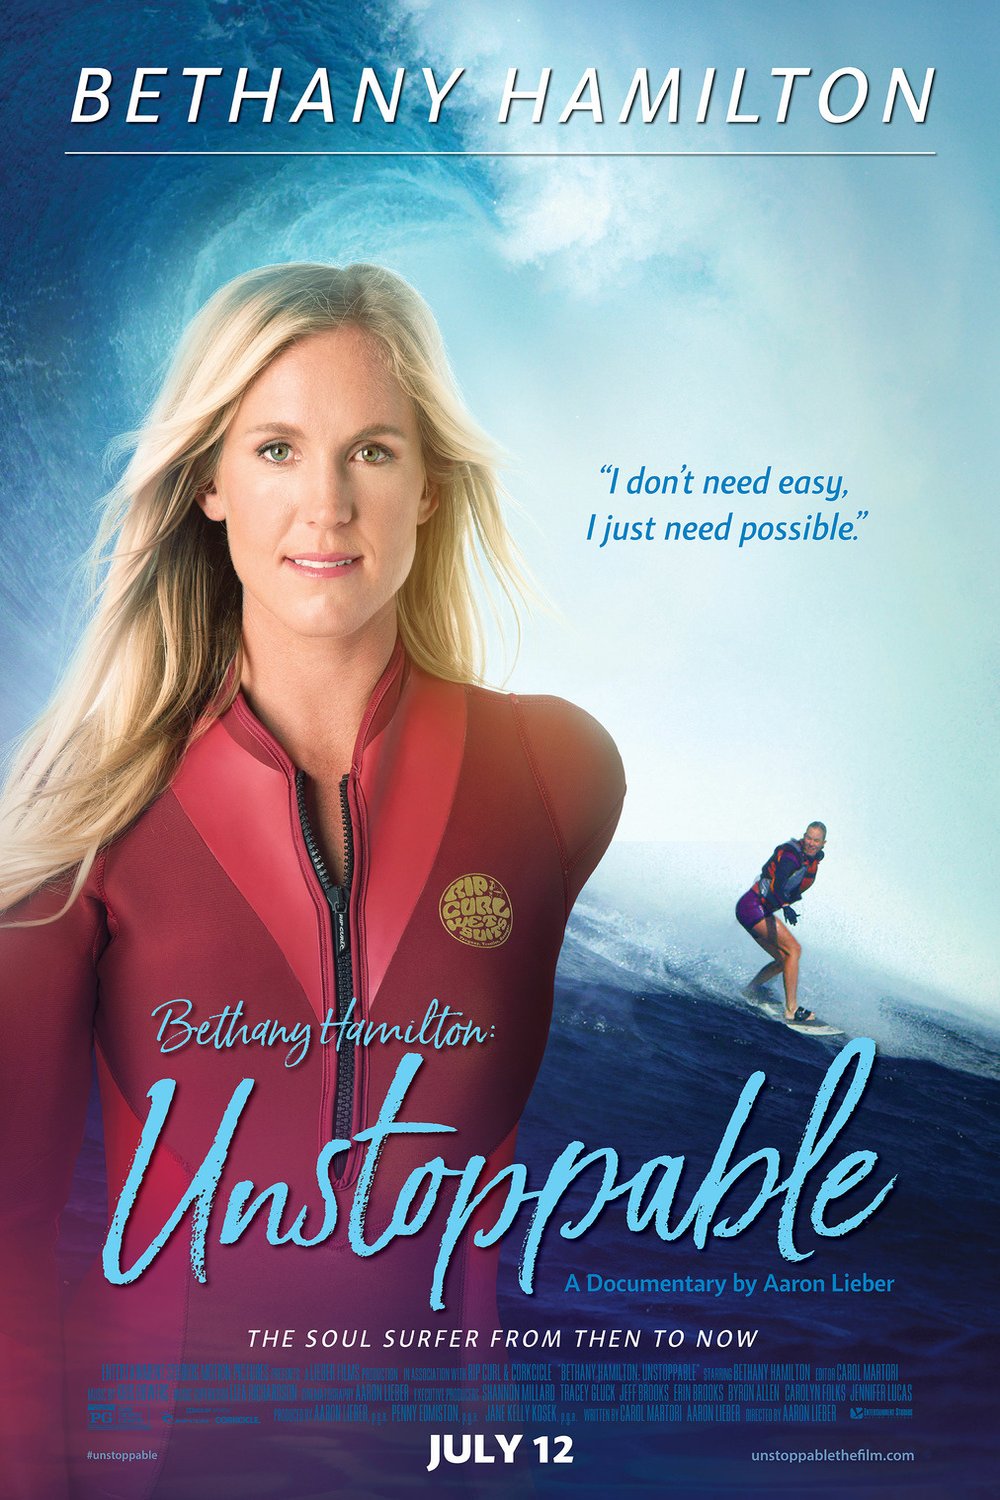 Poster of the movie Bethany Hamilton: Unstoppable